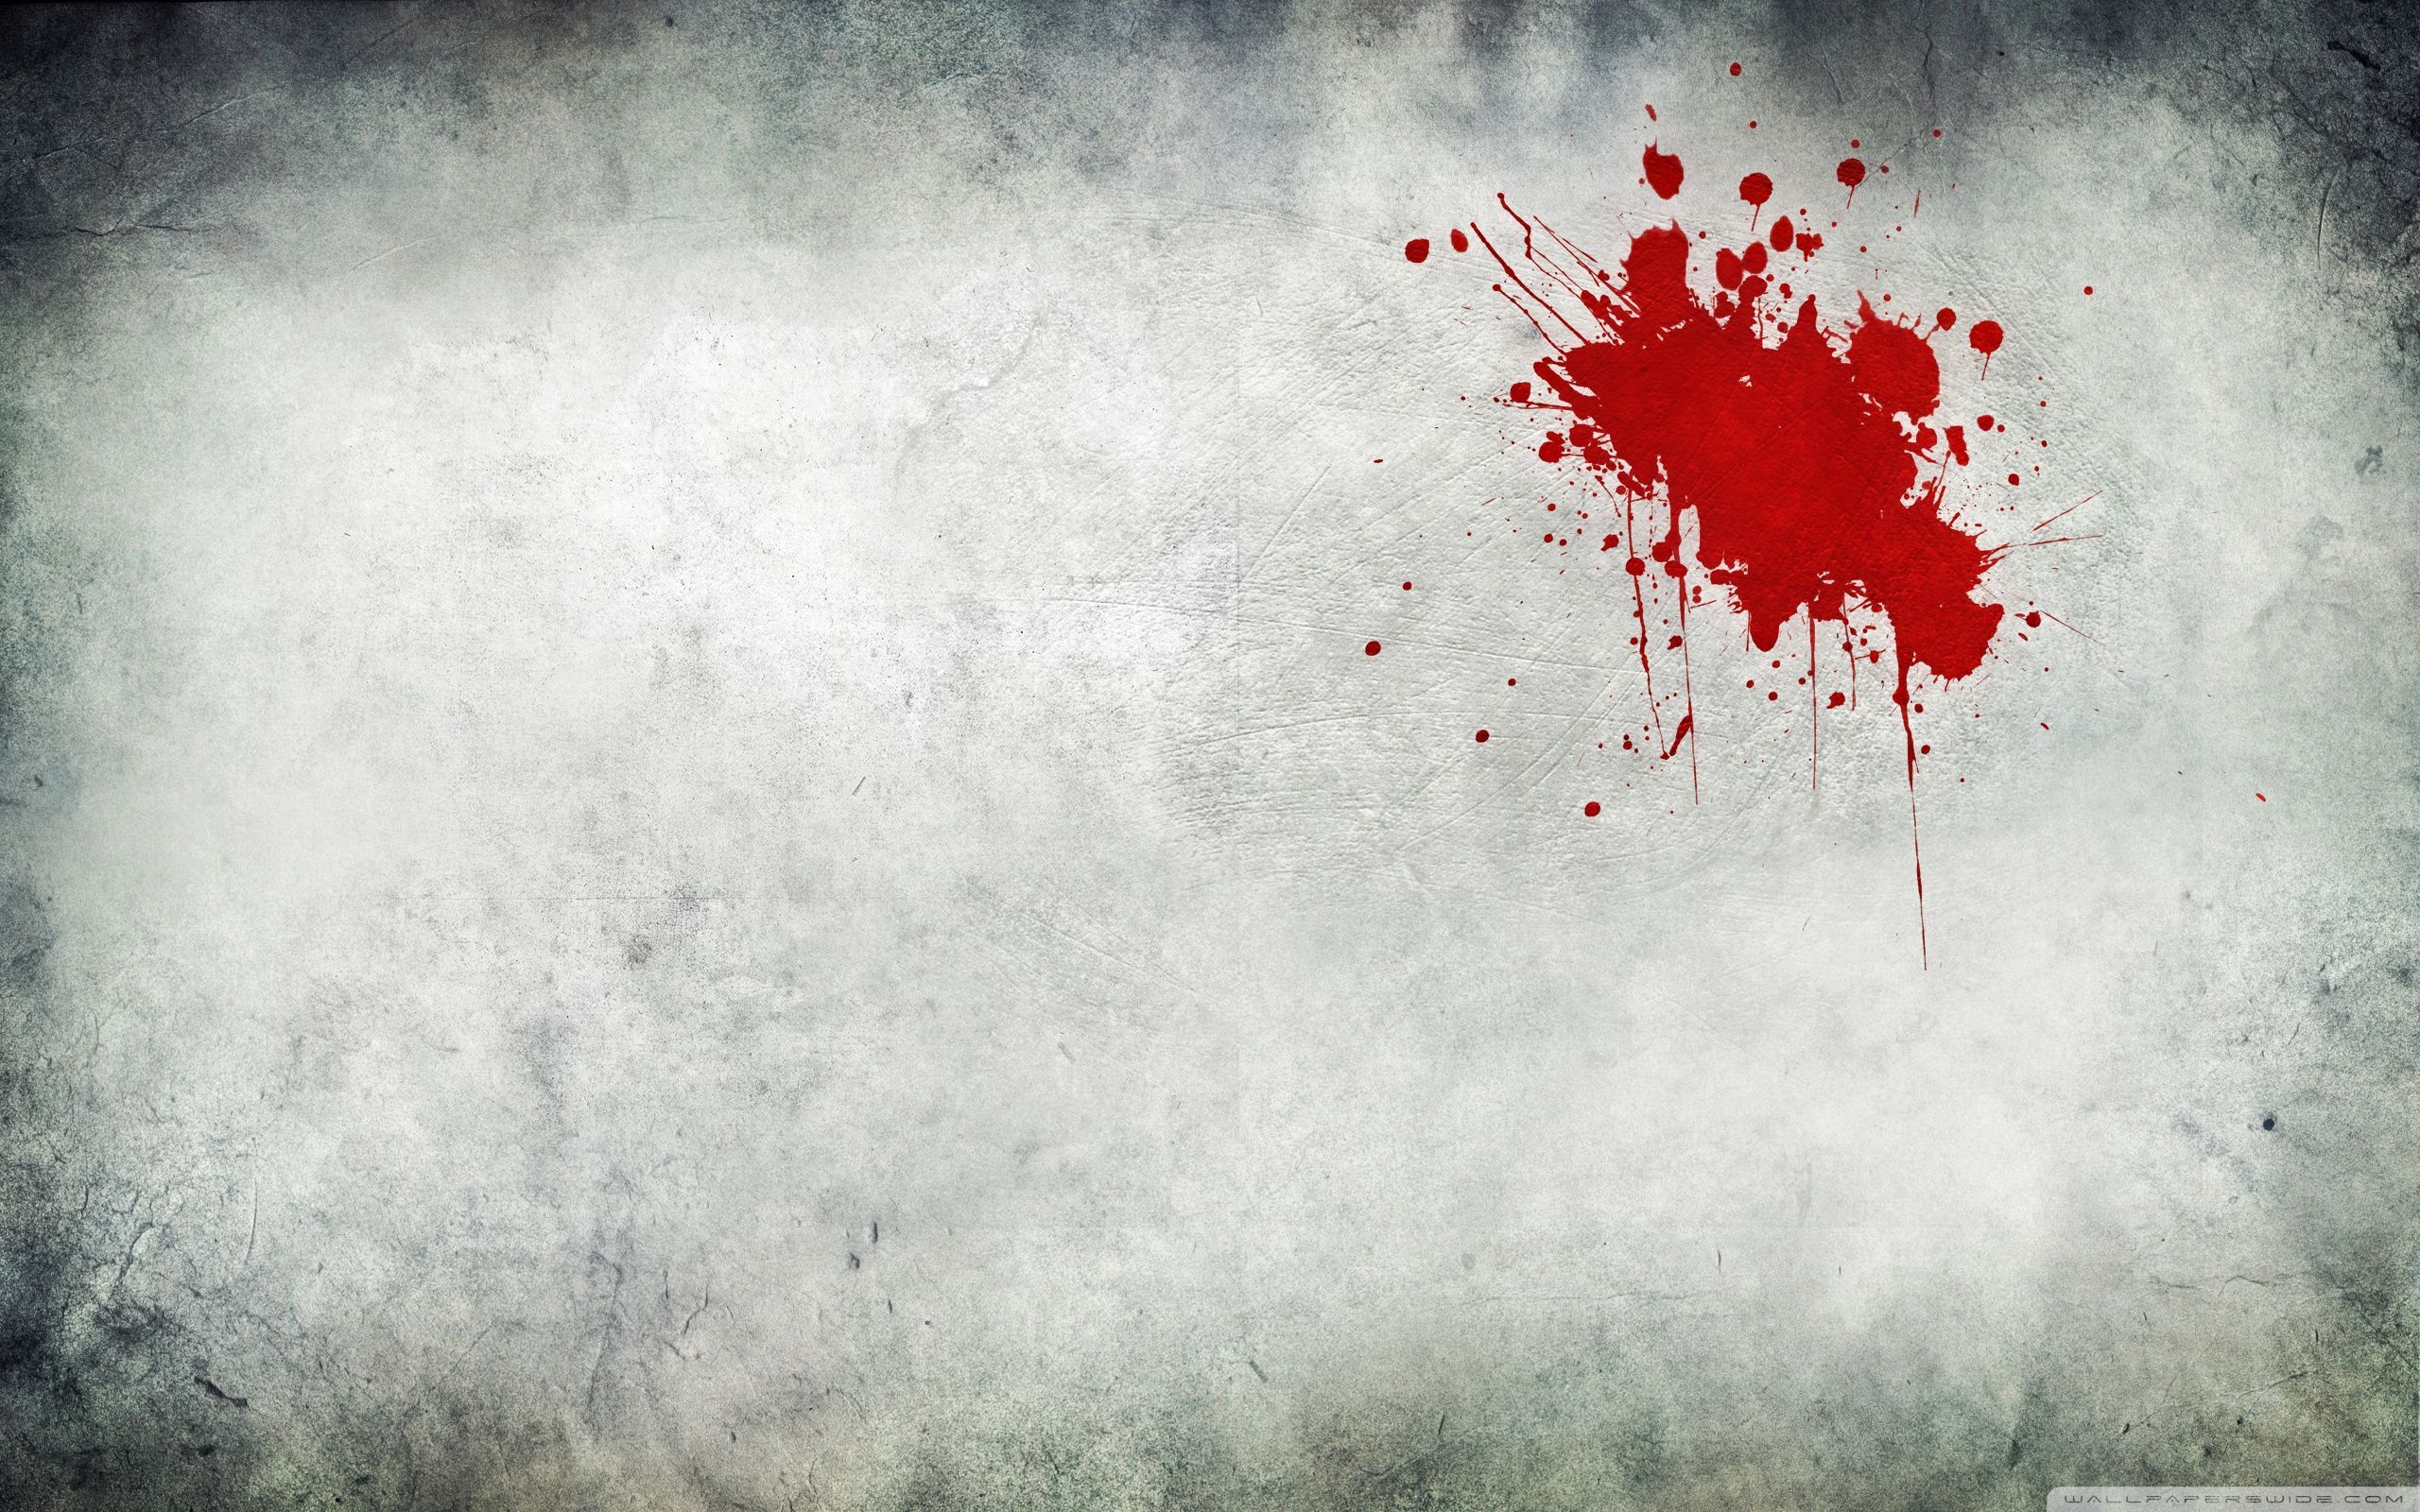 3 Inches Of Blood Wallpapers